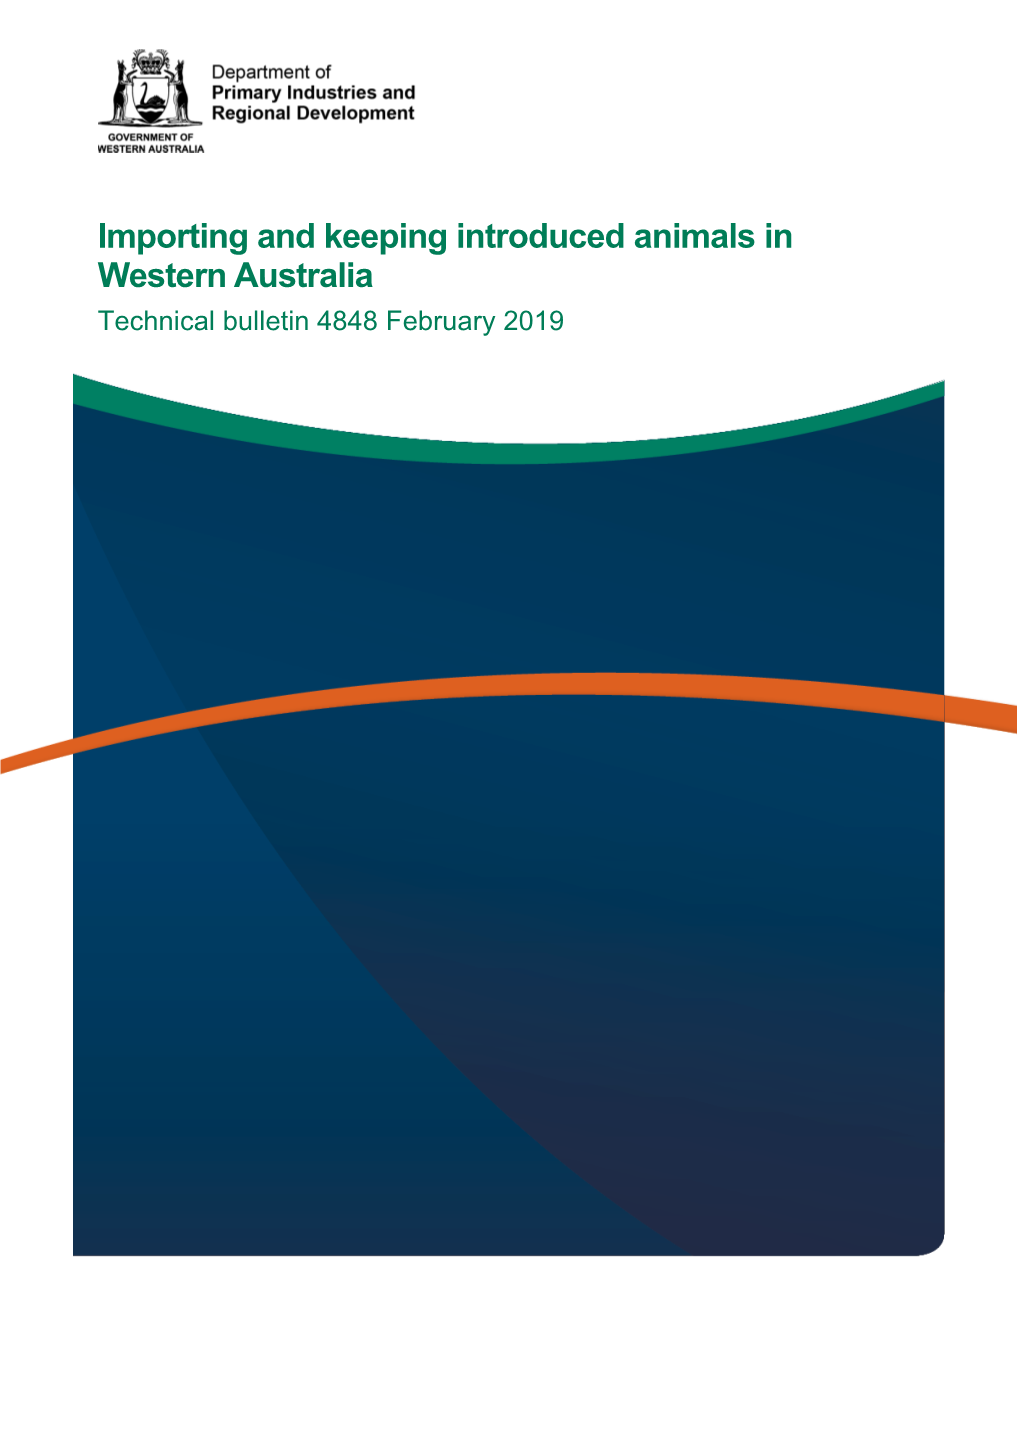 Importing and Keeping Introduced Animals in Western Australia Technical Bulletin 4848 February 2019